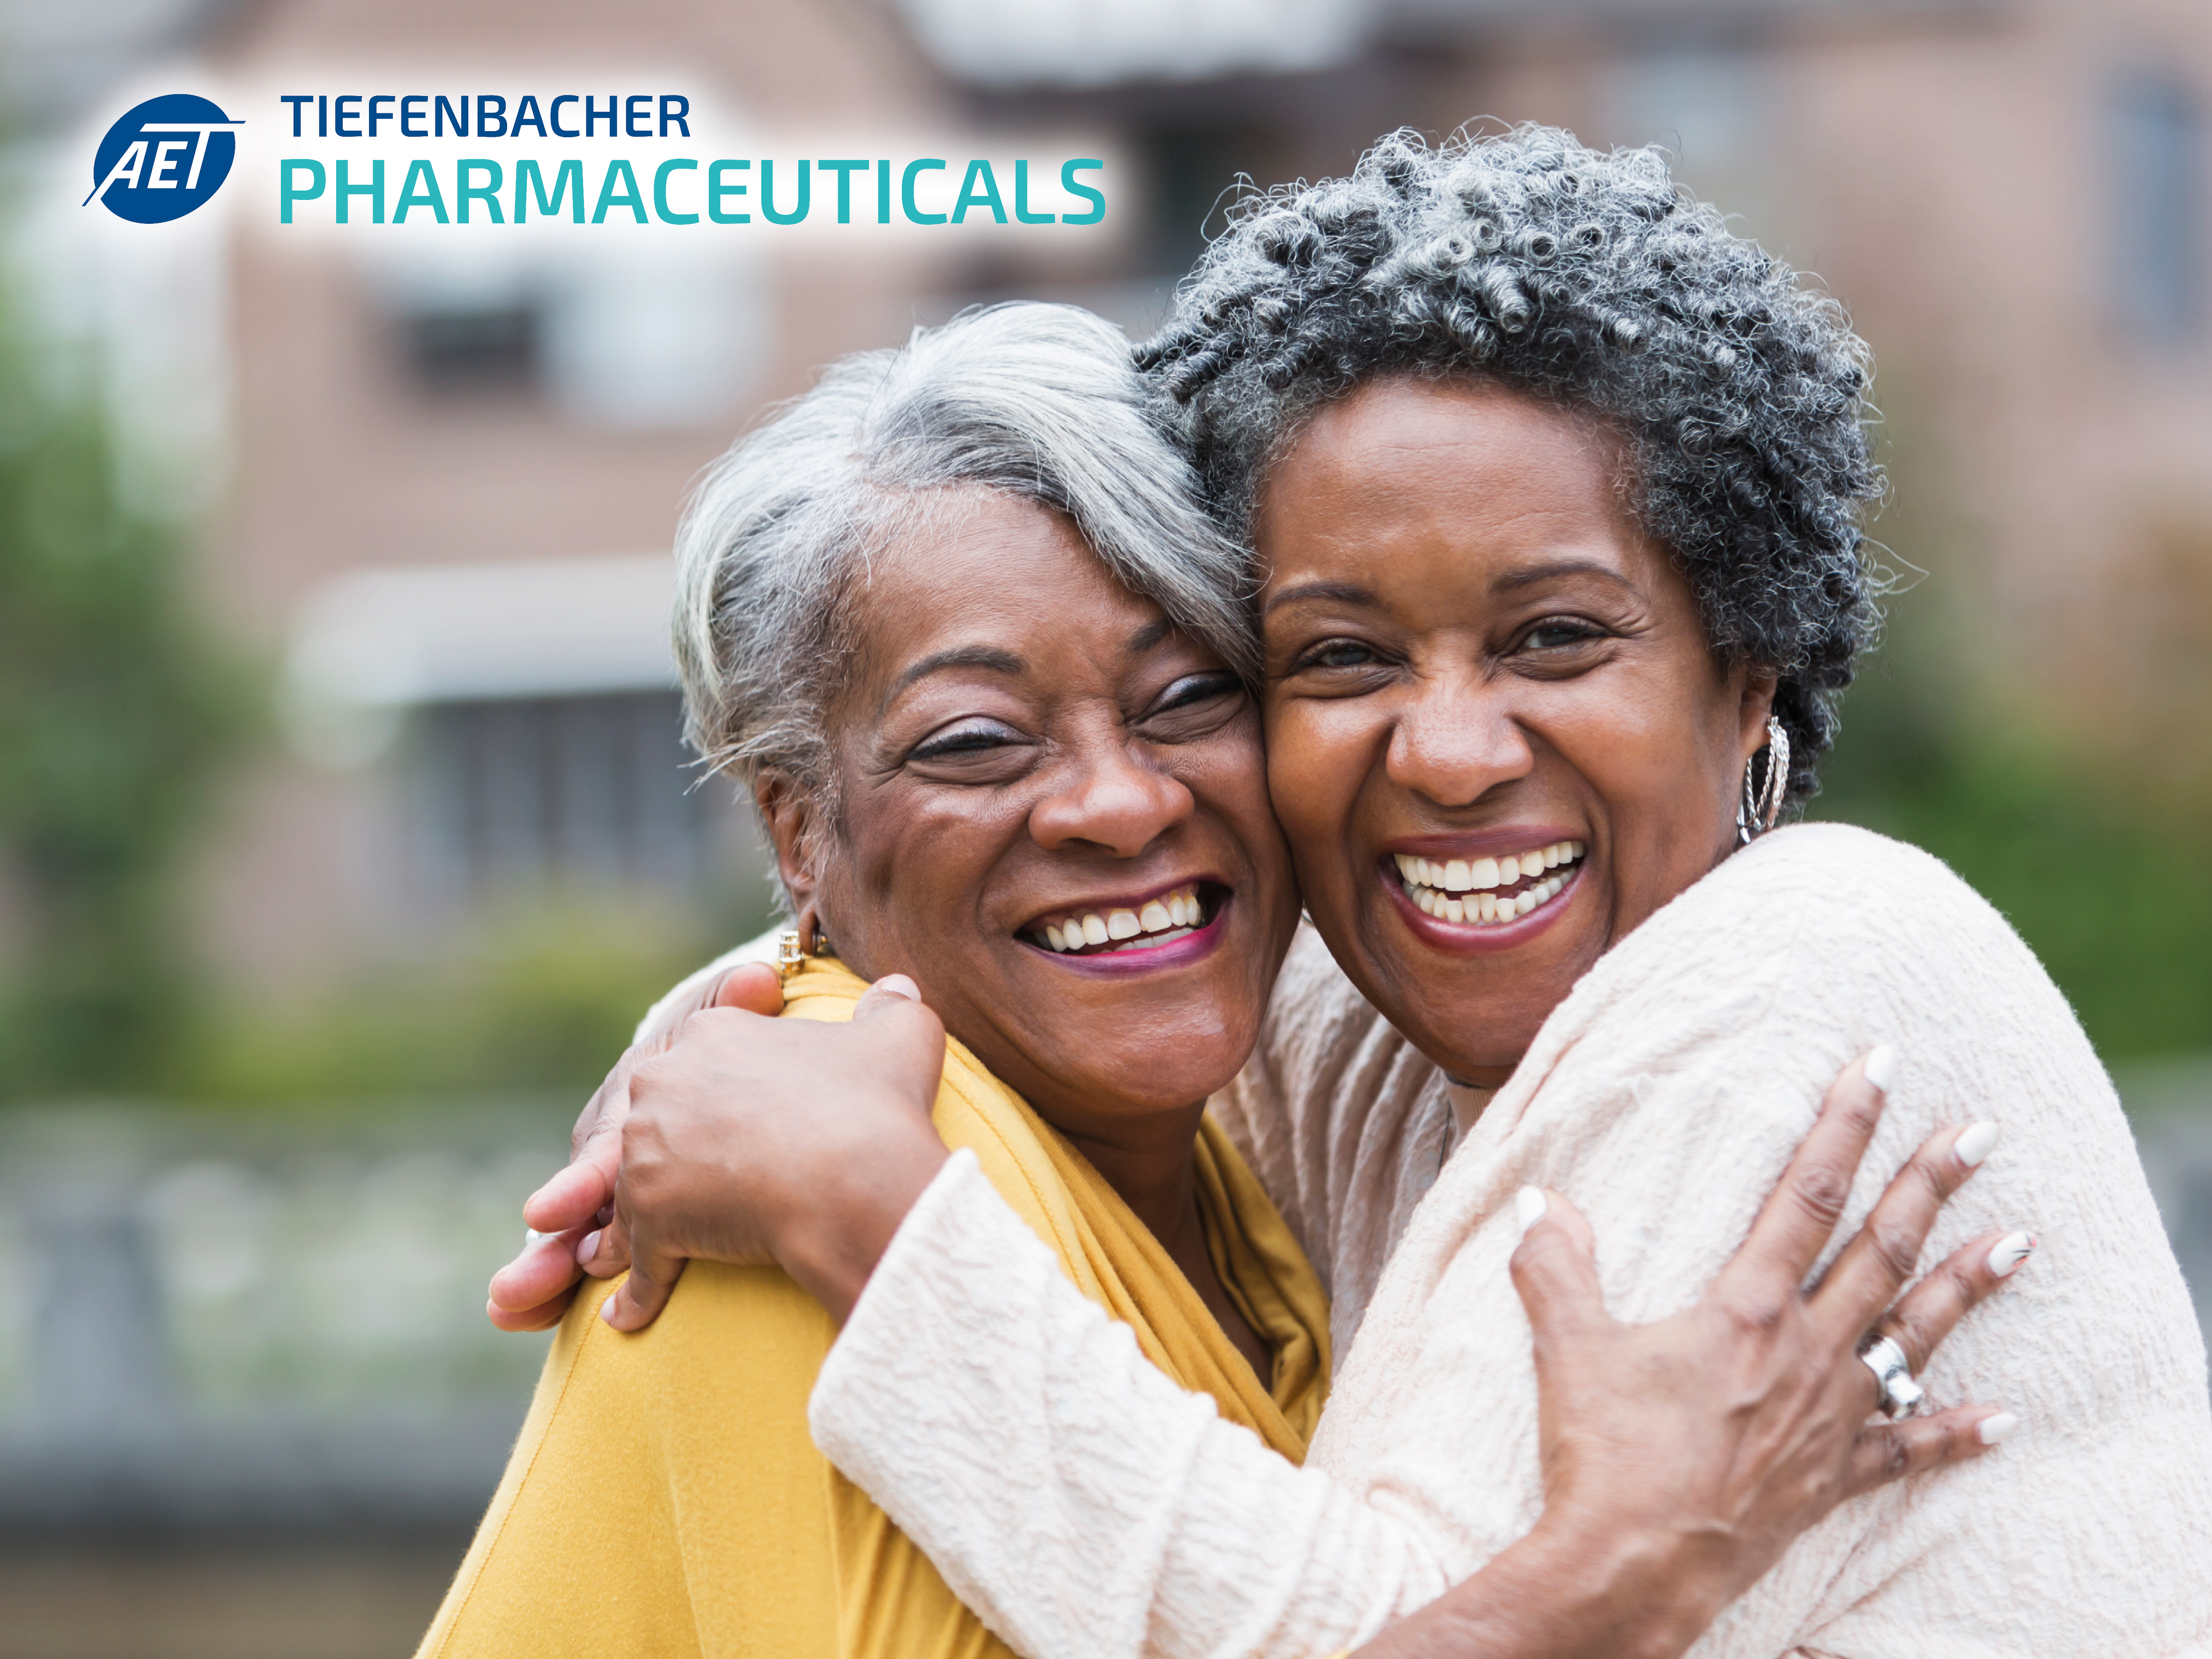 Tiefenbacher Pharmaceuticals launch of the generic version of Vildagliptin and the combination product Vildagliptin/Metformin in Africa.